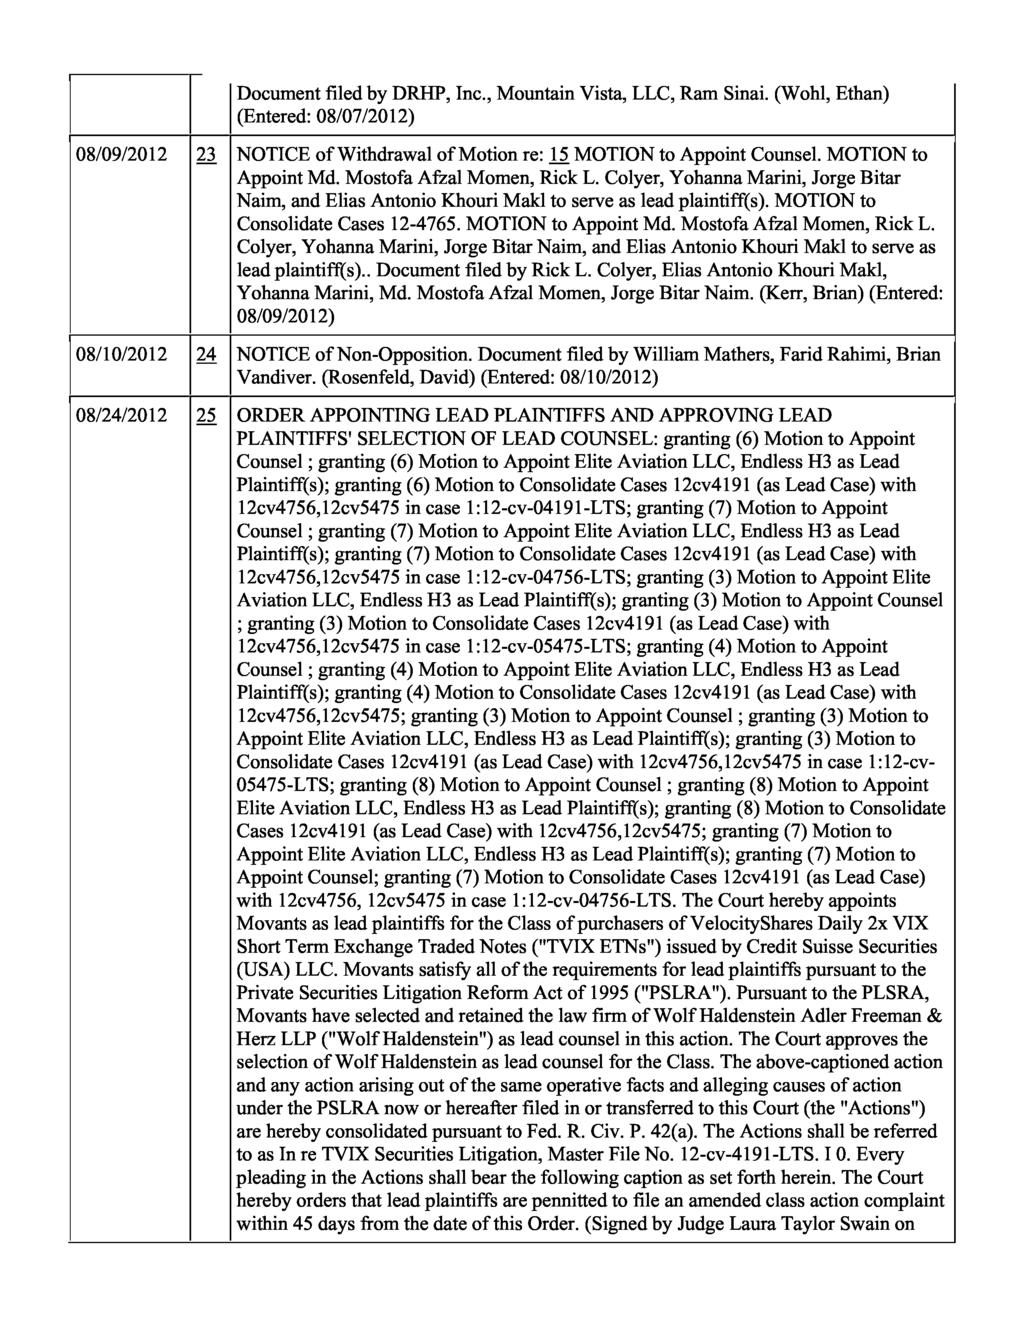 Document filed by DRHP, Inc., Mountain Vista, LLC, Ram Sinai. (Wohl, Ethan) (Entered: 08/07/2012) 08/09/2012 23 NOTICE of Withdrawal of Motion re: 15 MOTION to Appoint Counsel. MOTION to Appoint Md.